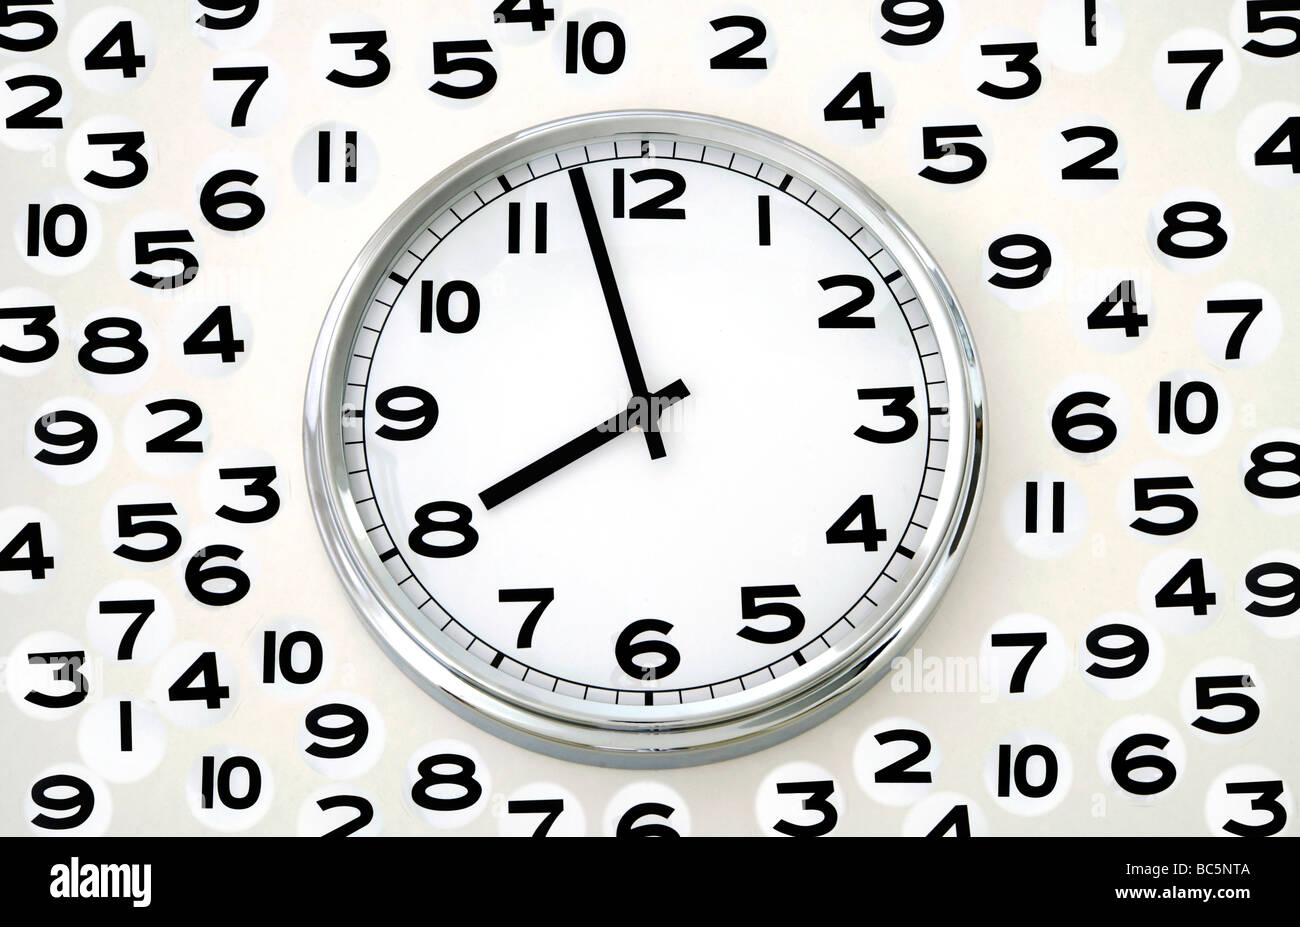 Wall clock, time measurement, close up Stock Photo